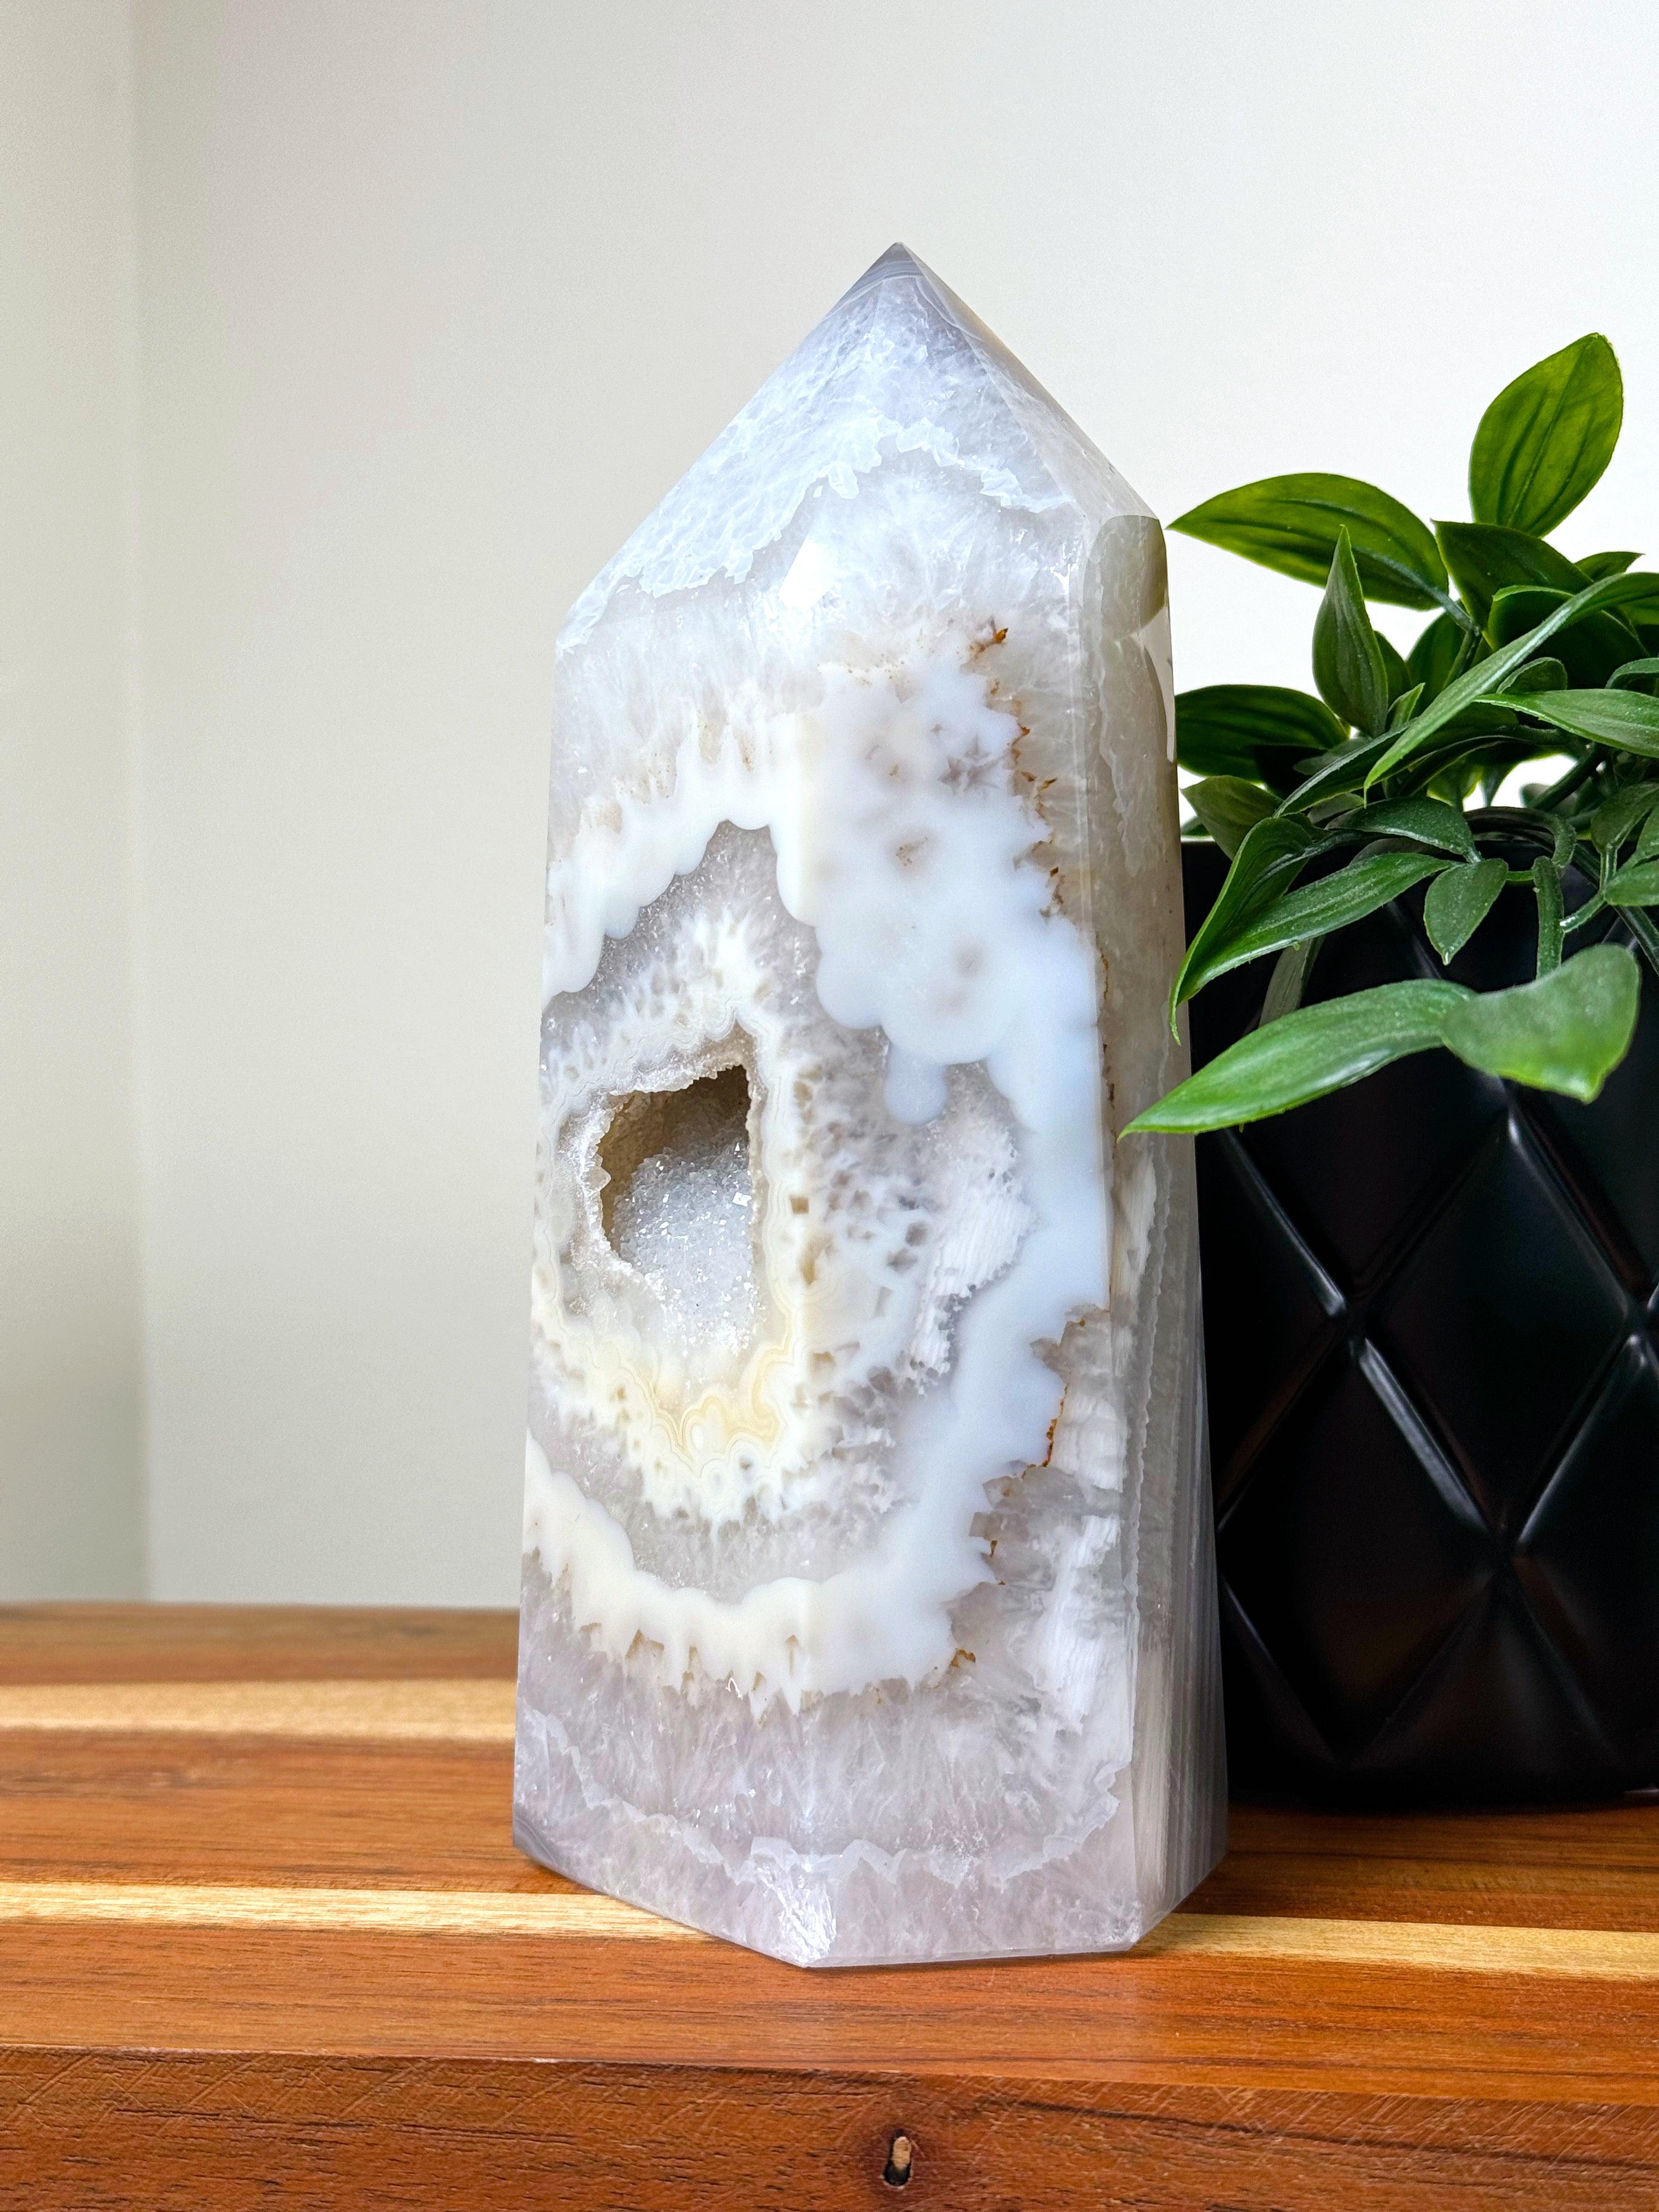 DRUZY AGATE TOWER 7 - agate, druzy agate, googly agate, googly eye, googly eye agate, one of a kind, point, statement piece, tower - The Mineral Maven